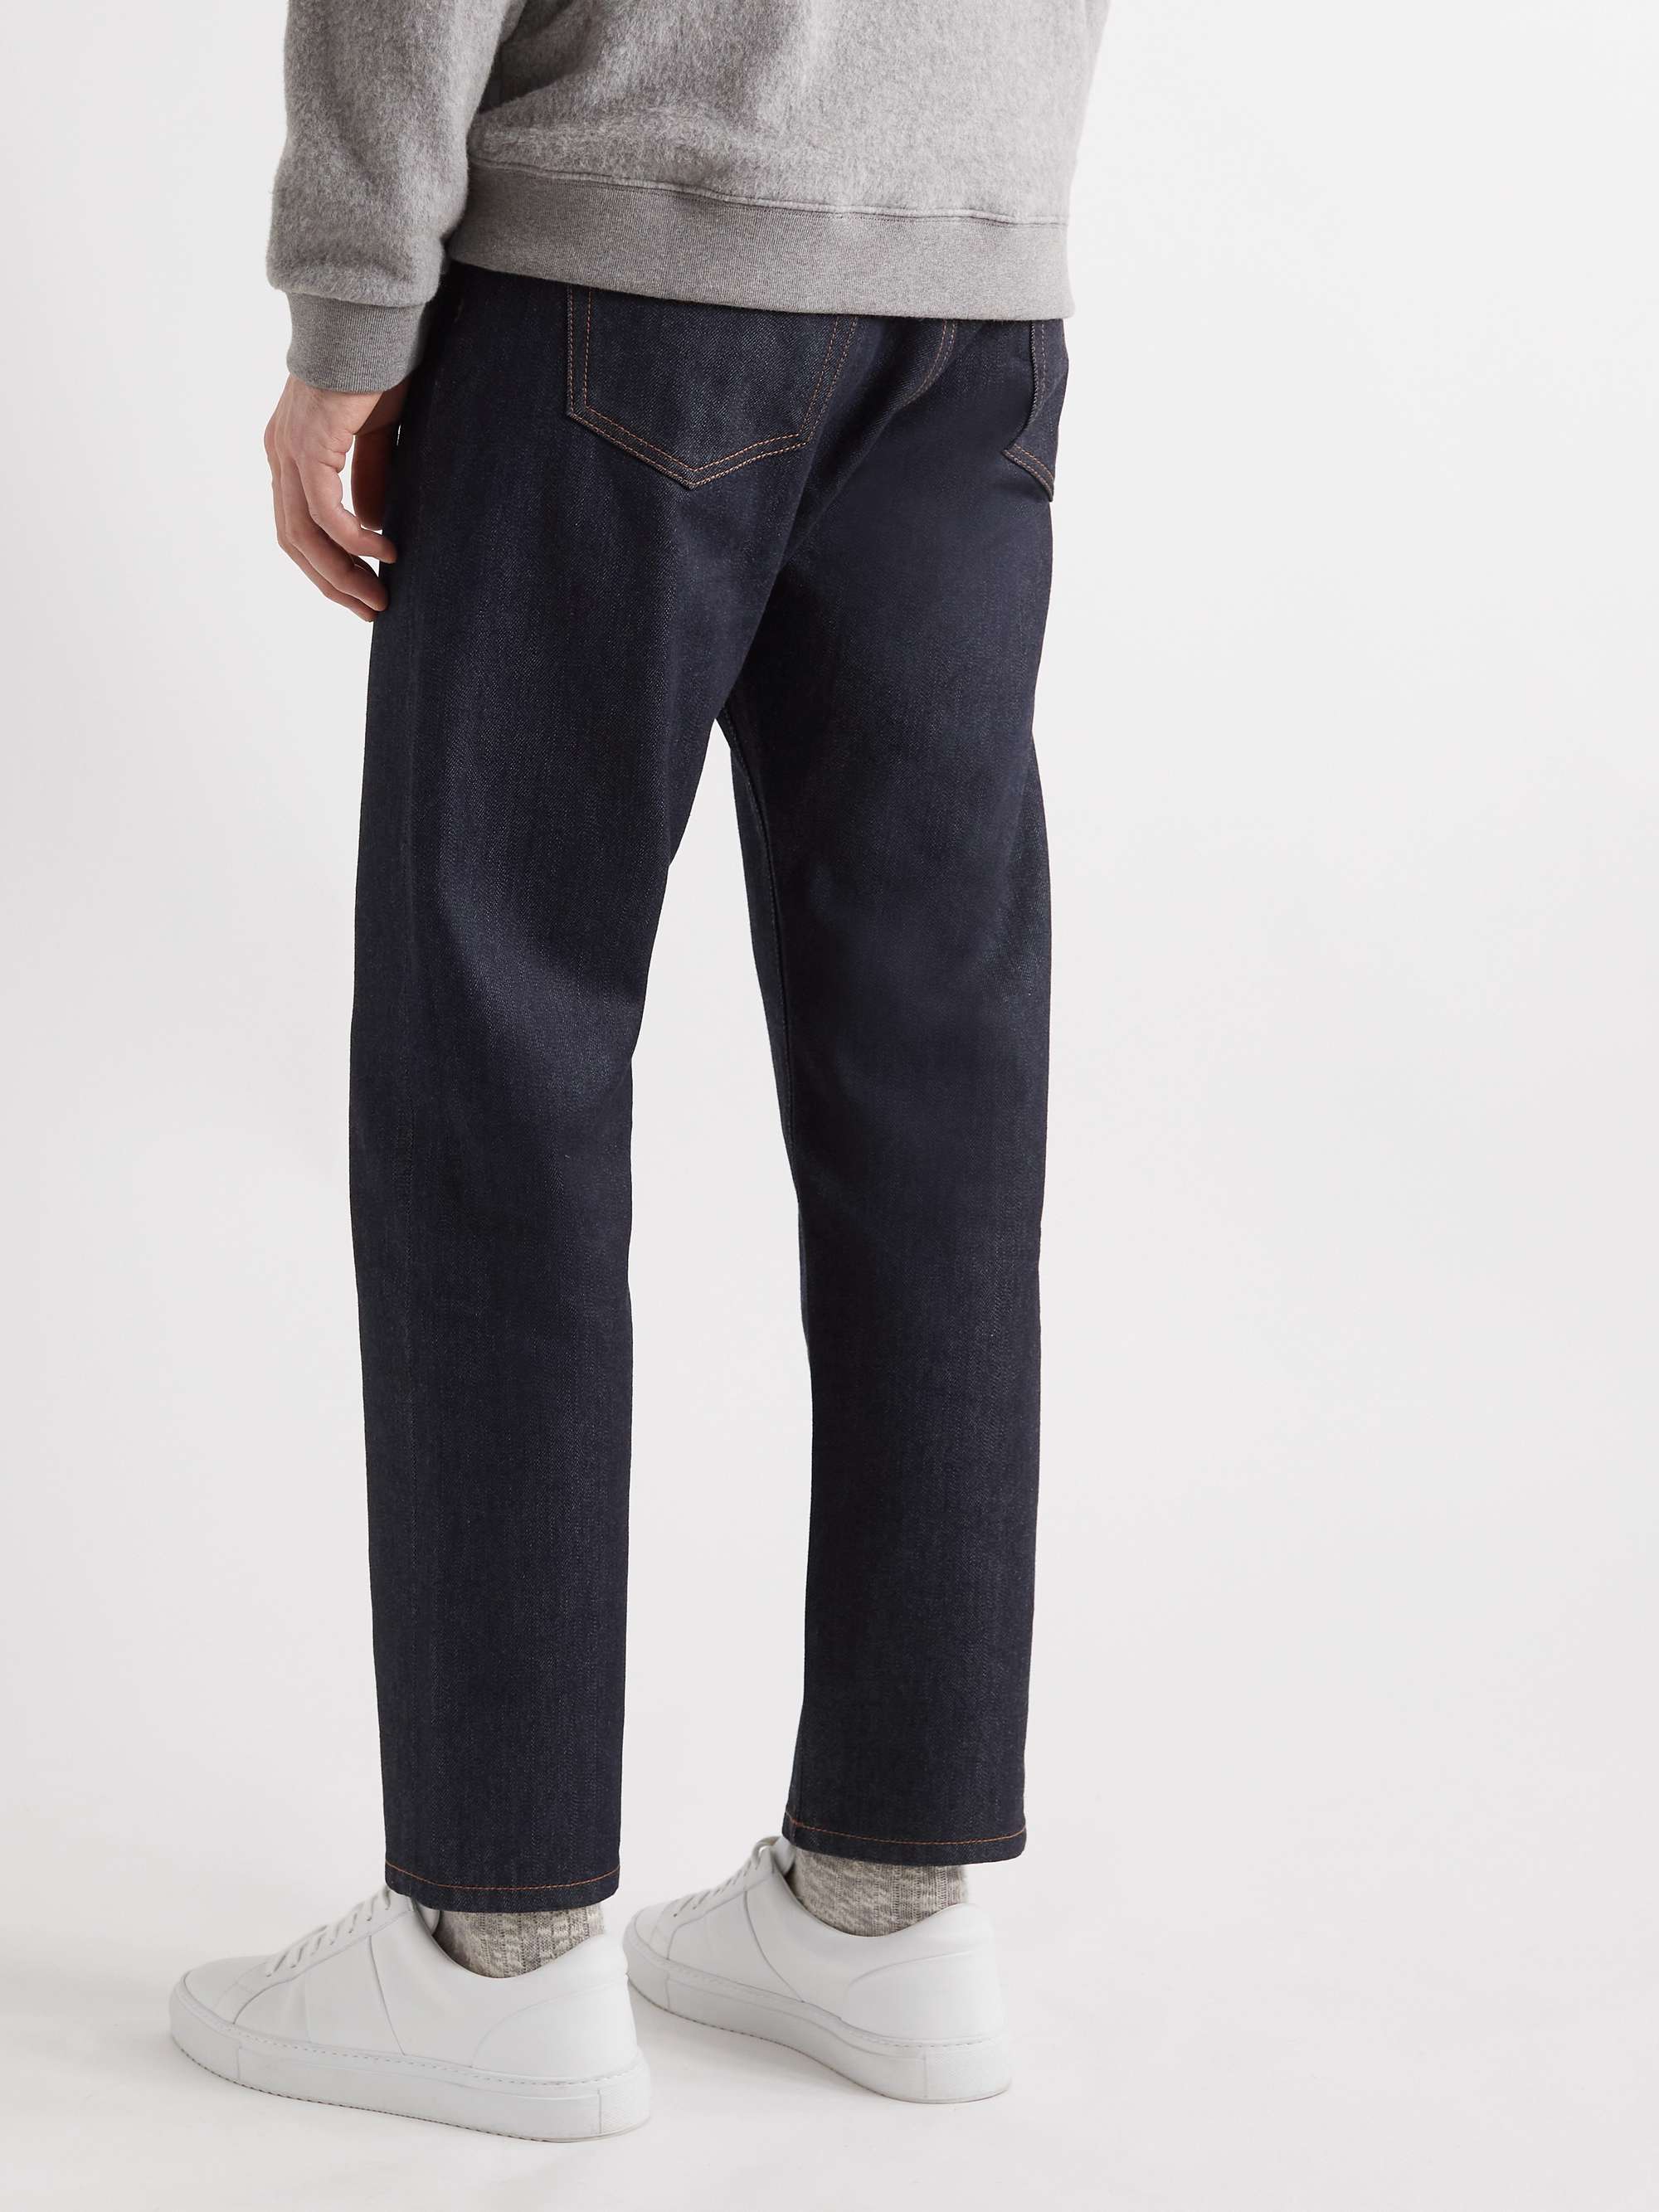 SSAM Yoshi Straight-Leg Cropped Cotton and Cashmere-Blend Jeans